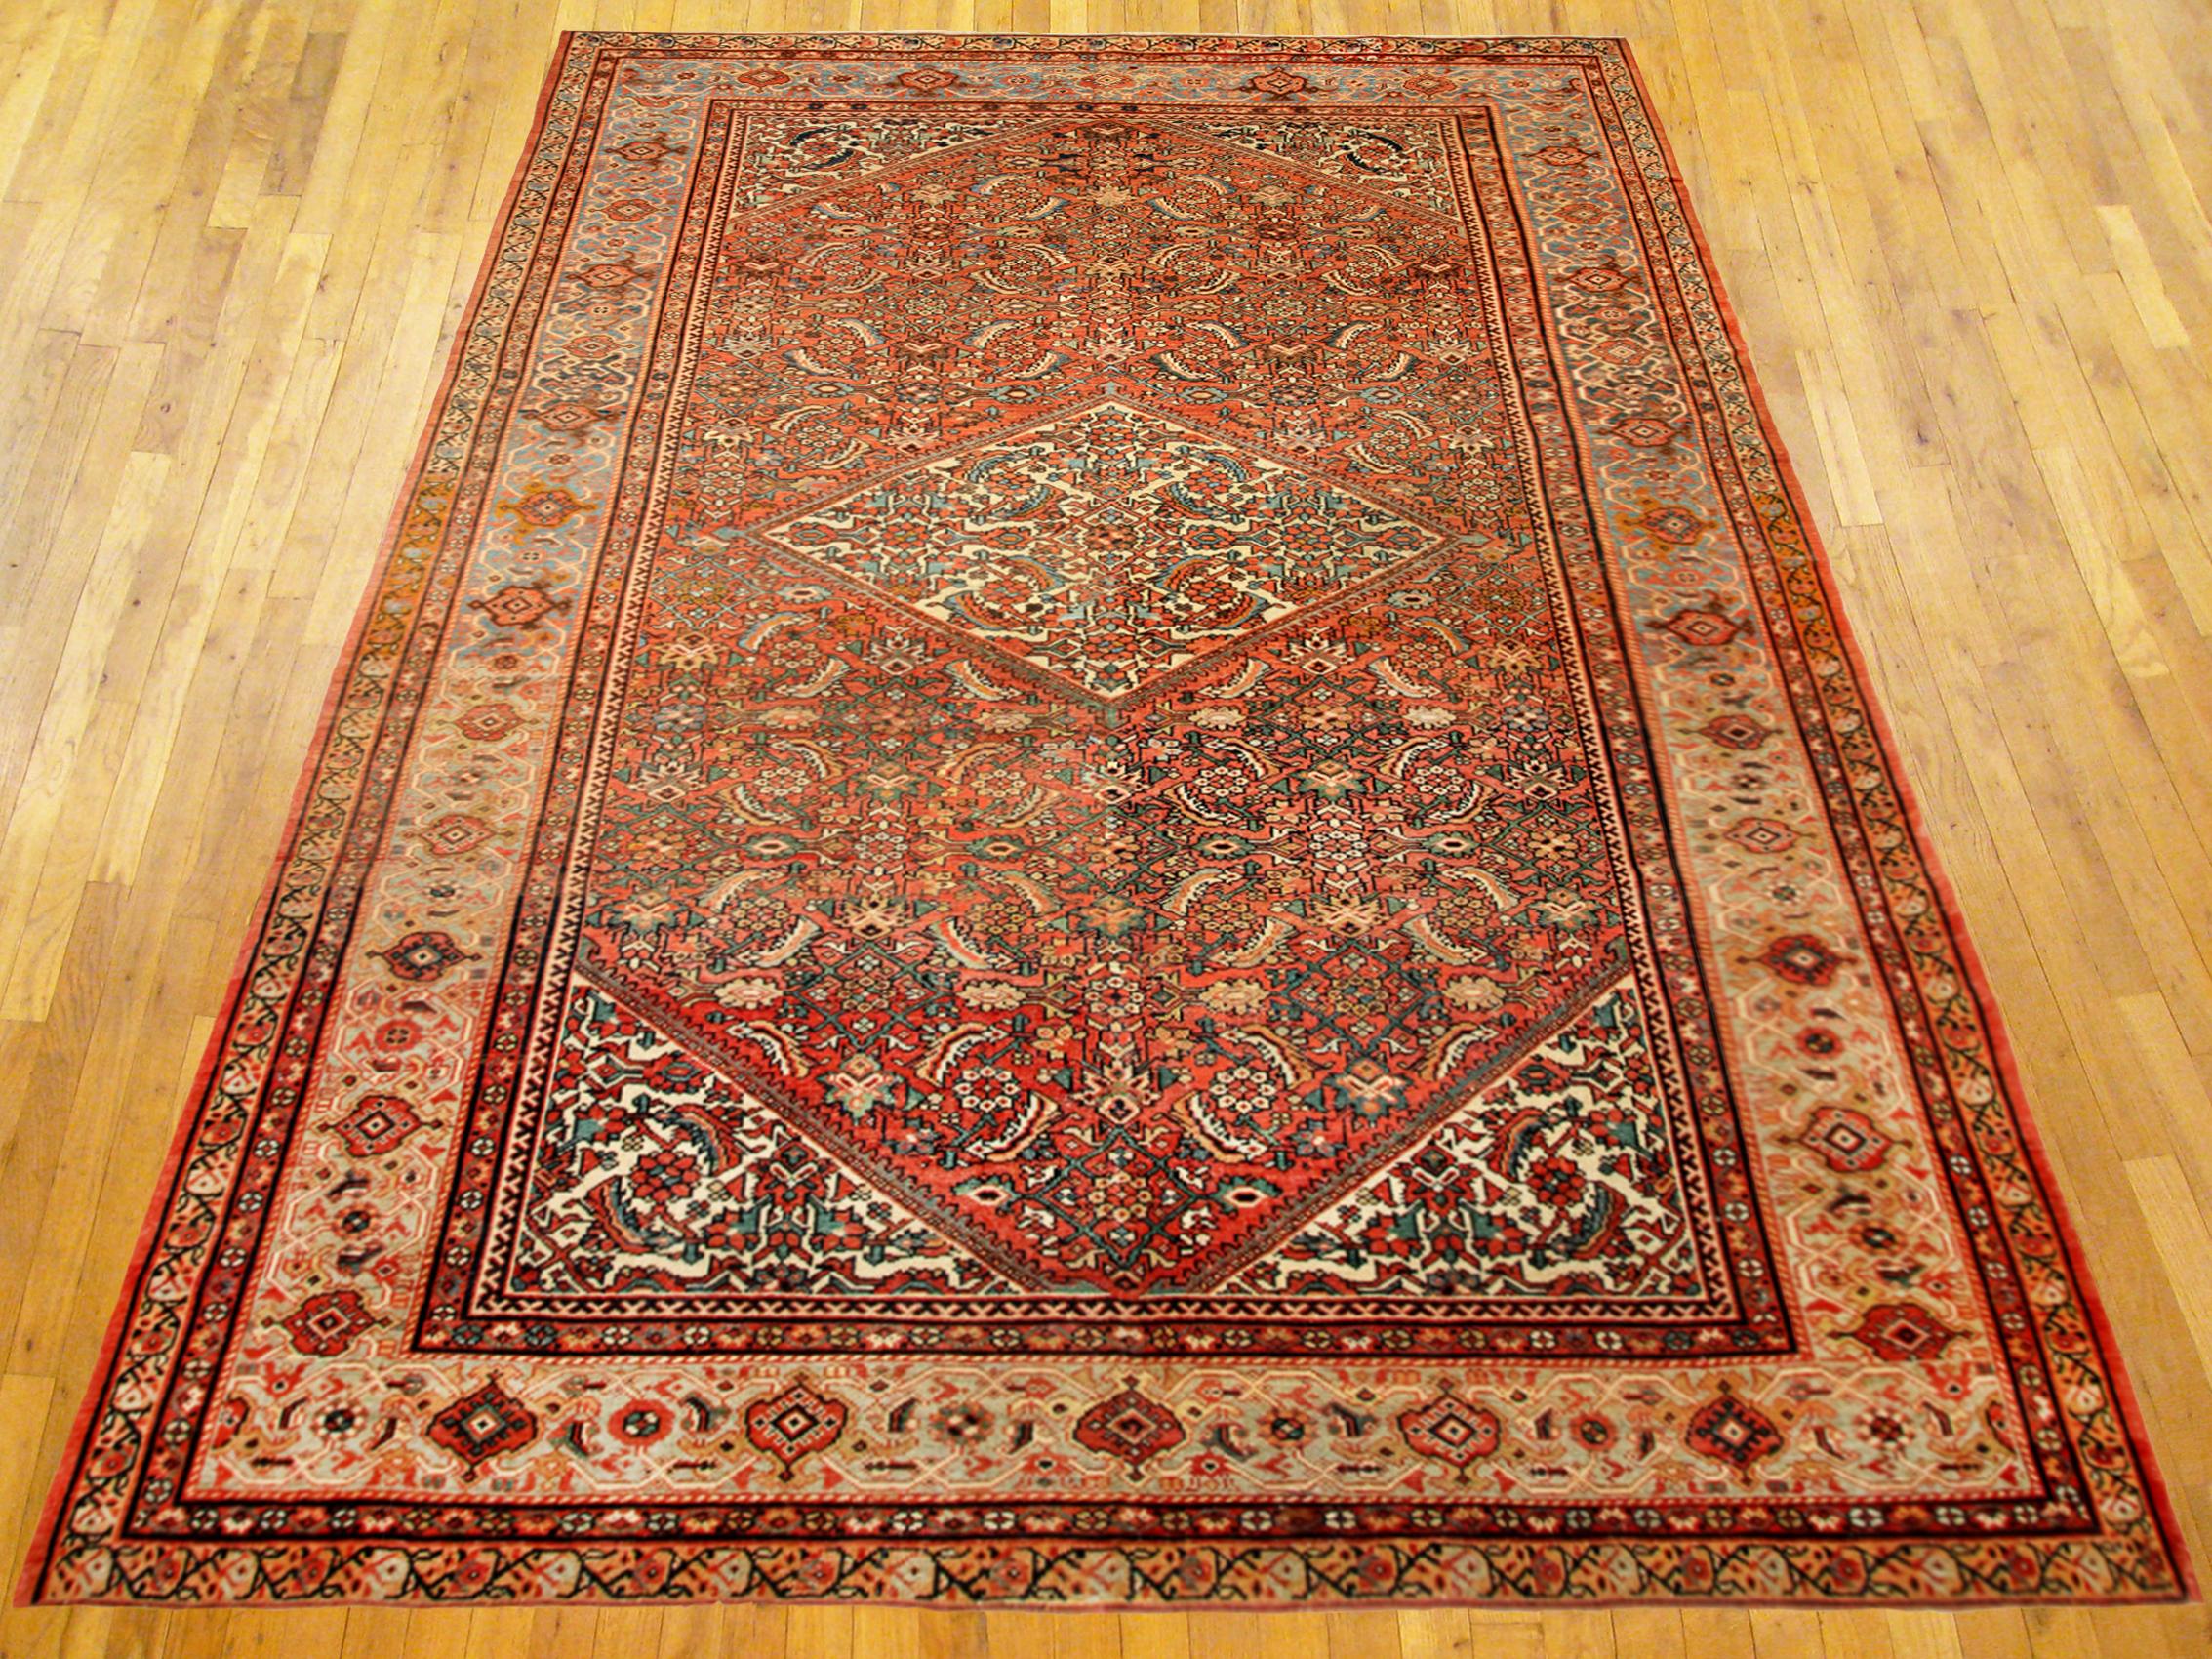 Antique Persan Sultanabad Rug, Room size, circa 1910.

A one-of-a-kind antique Persian Sultanabad oriental carpet, hand-knotted with short wool pile. This lovely hand-knotted wool carpet feaetures a central medallion on a terracotta primary field,